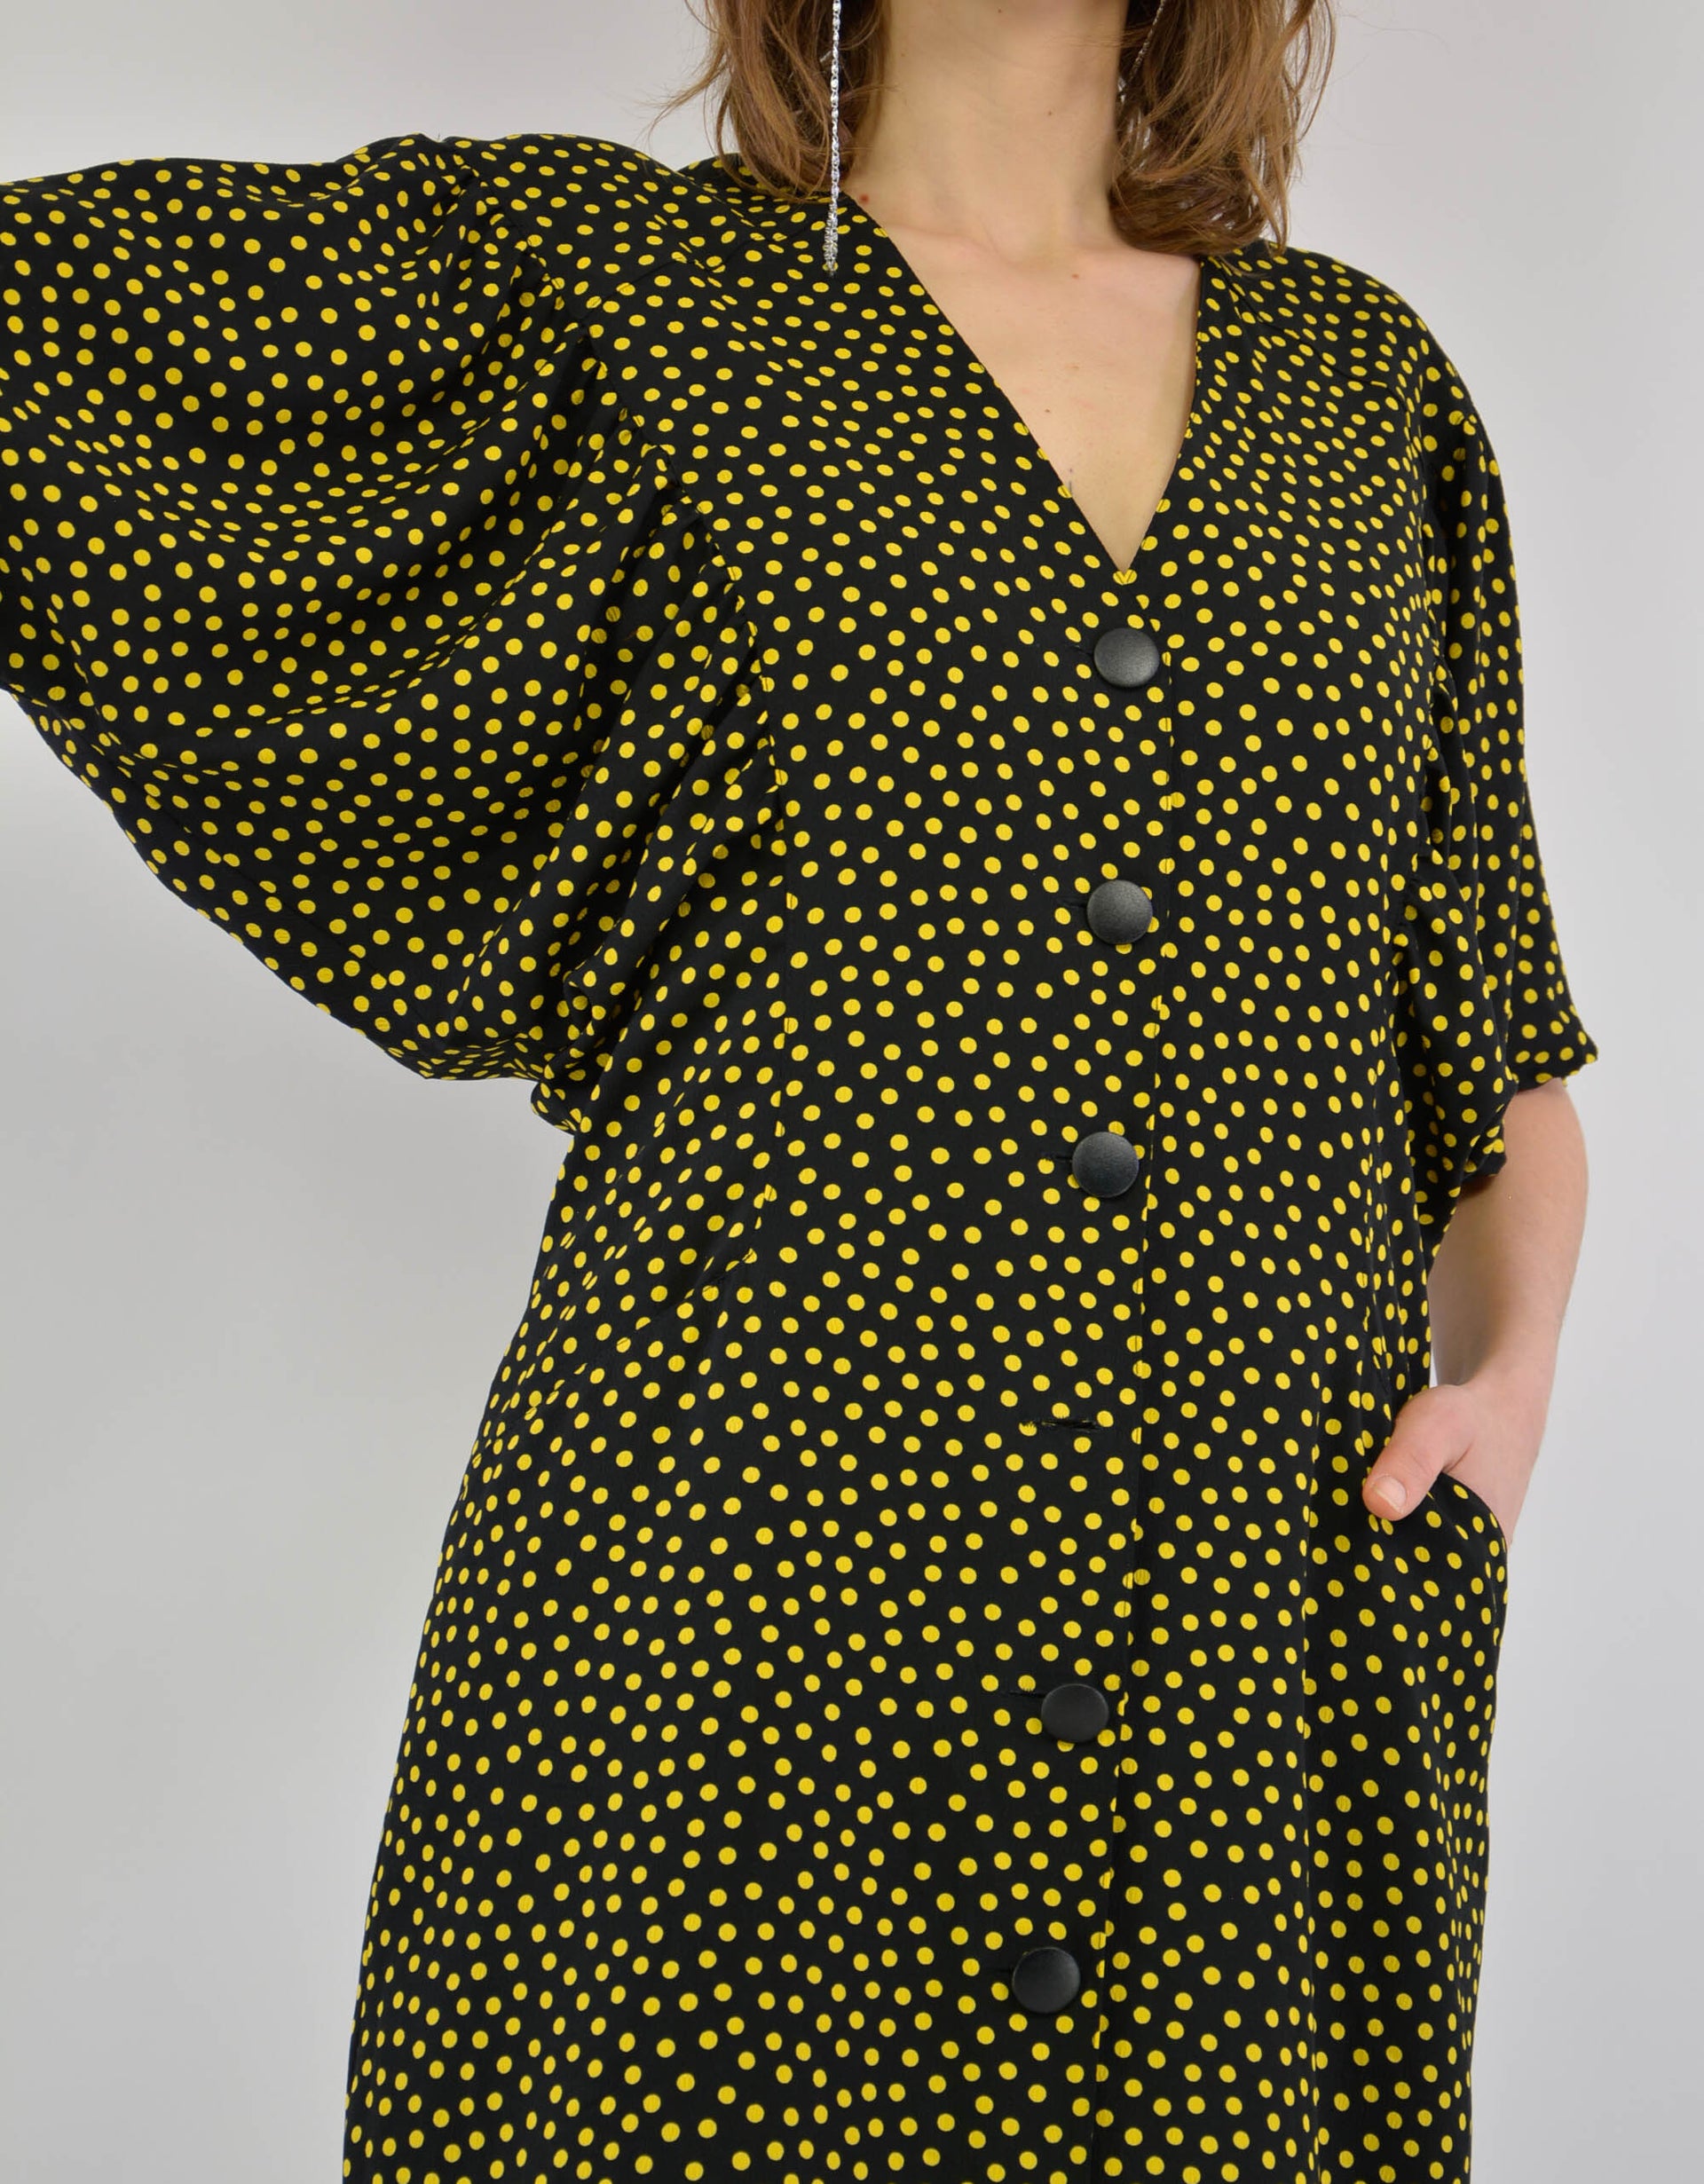 Dotted print dress - PICKNWEIGHT - VINTAGE KILO STORE